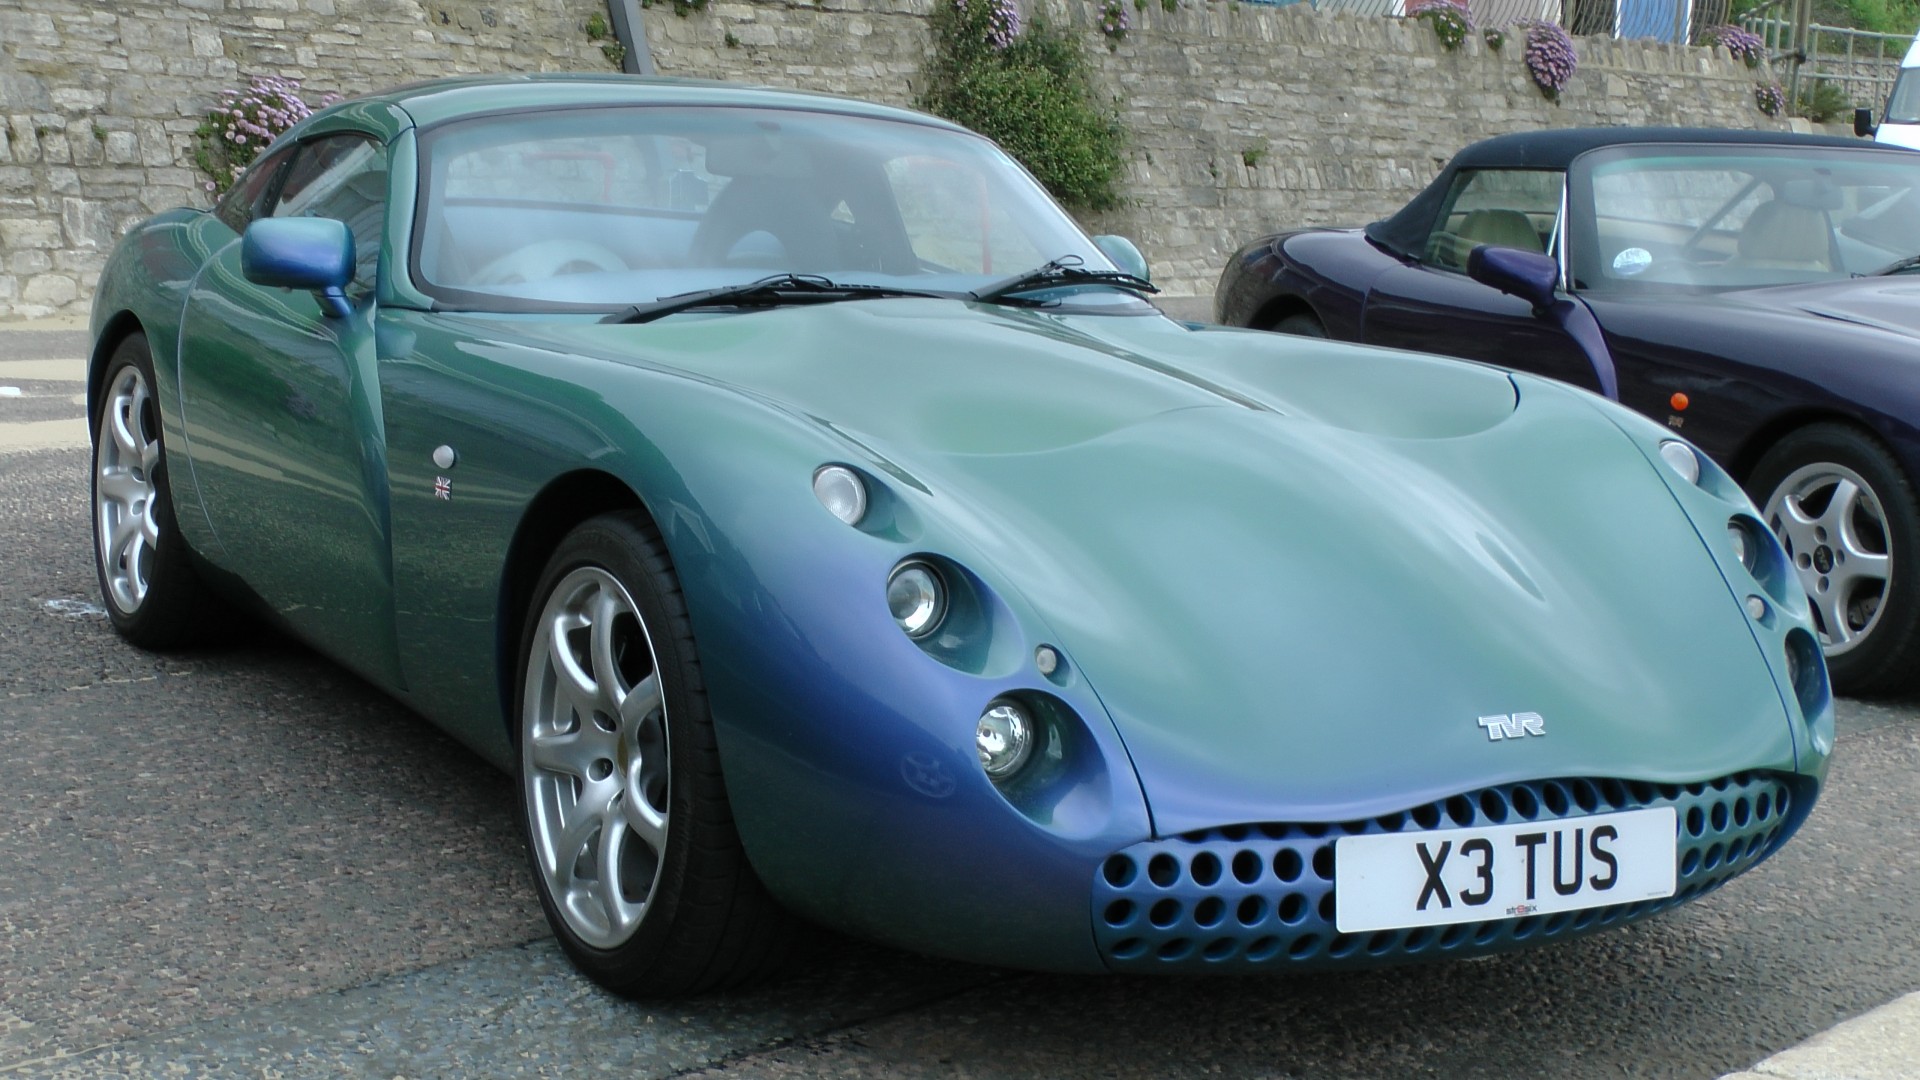 tvr tuscan racing green car tvr tuscan free photo